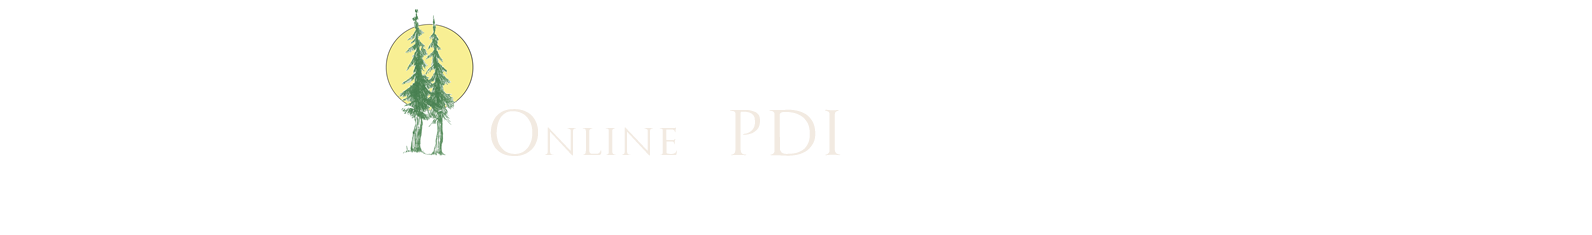 Open Door Biblical Counseling and Discipleship Ministry Online PDI